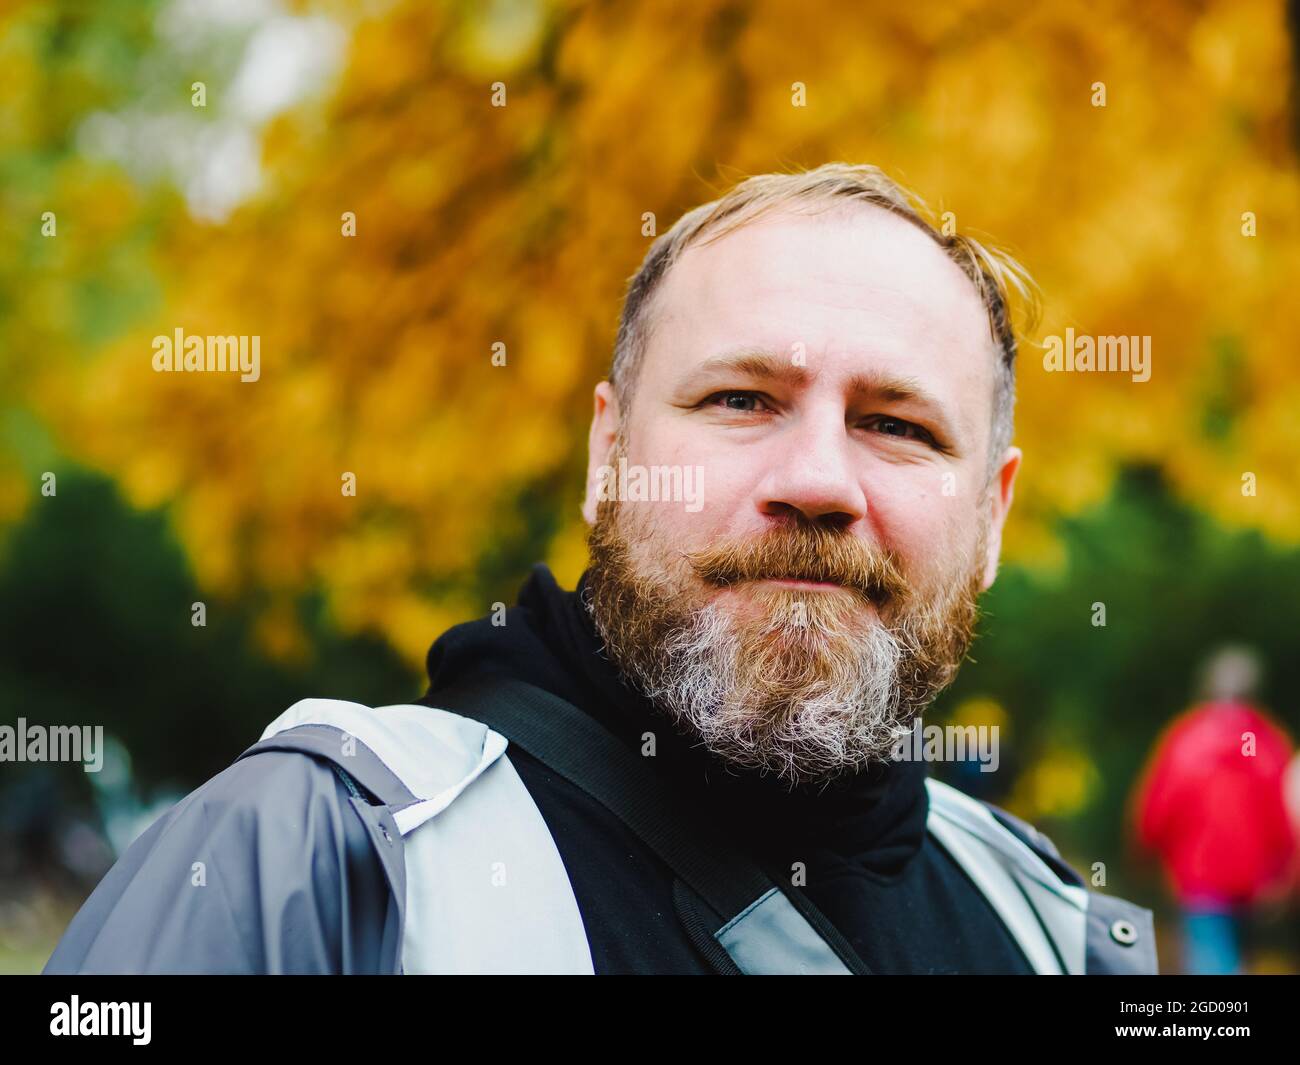 Adult Handsome bearded man outdoors portrait in autumn park. Candid portrait Stock Photo